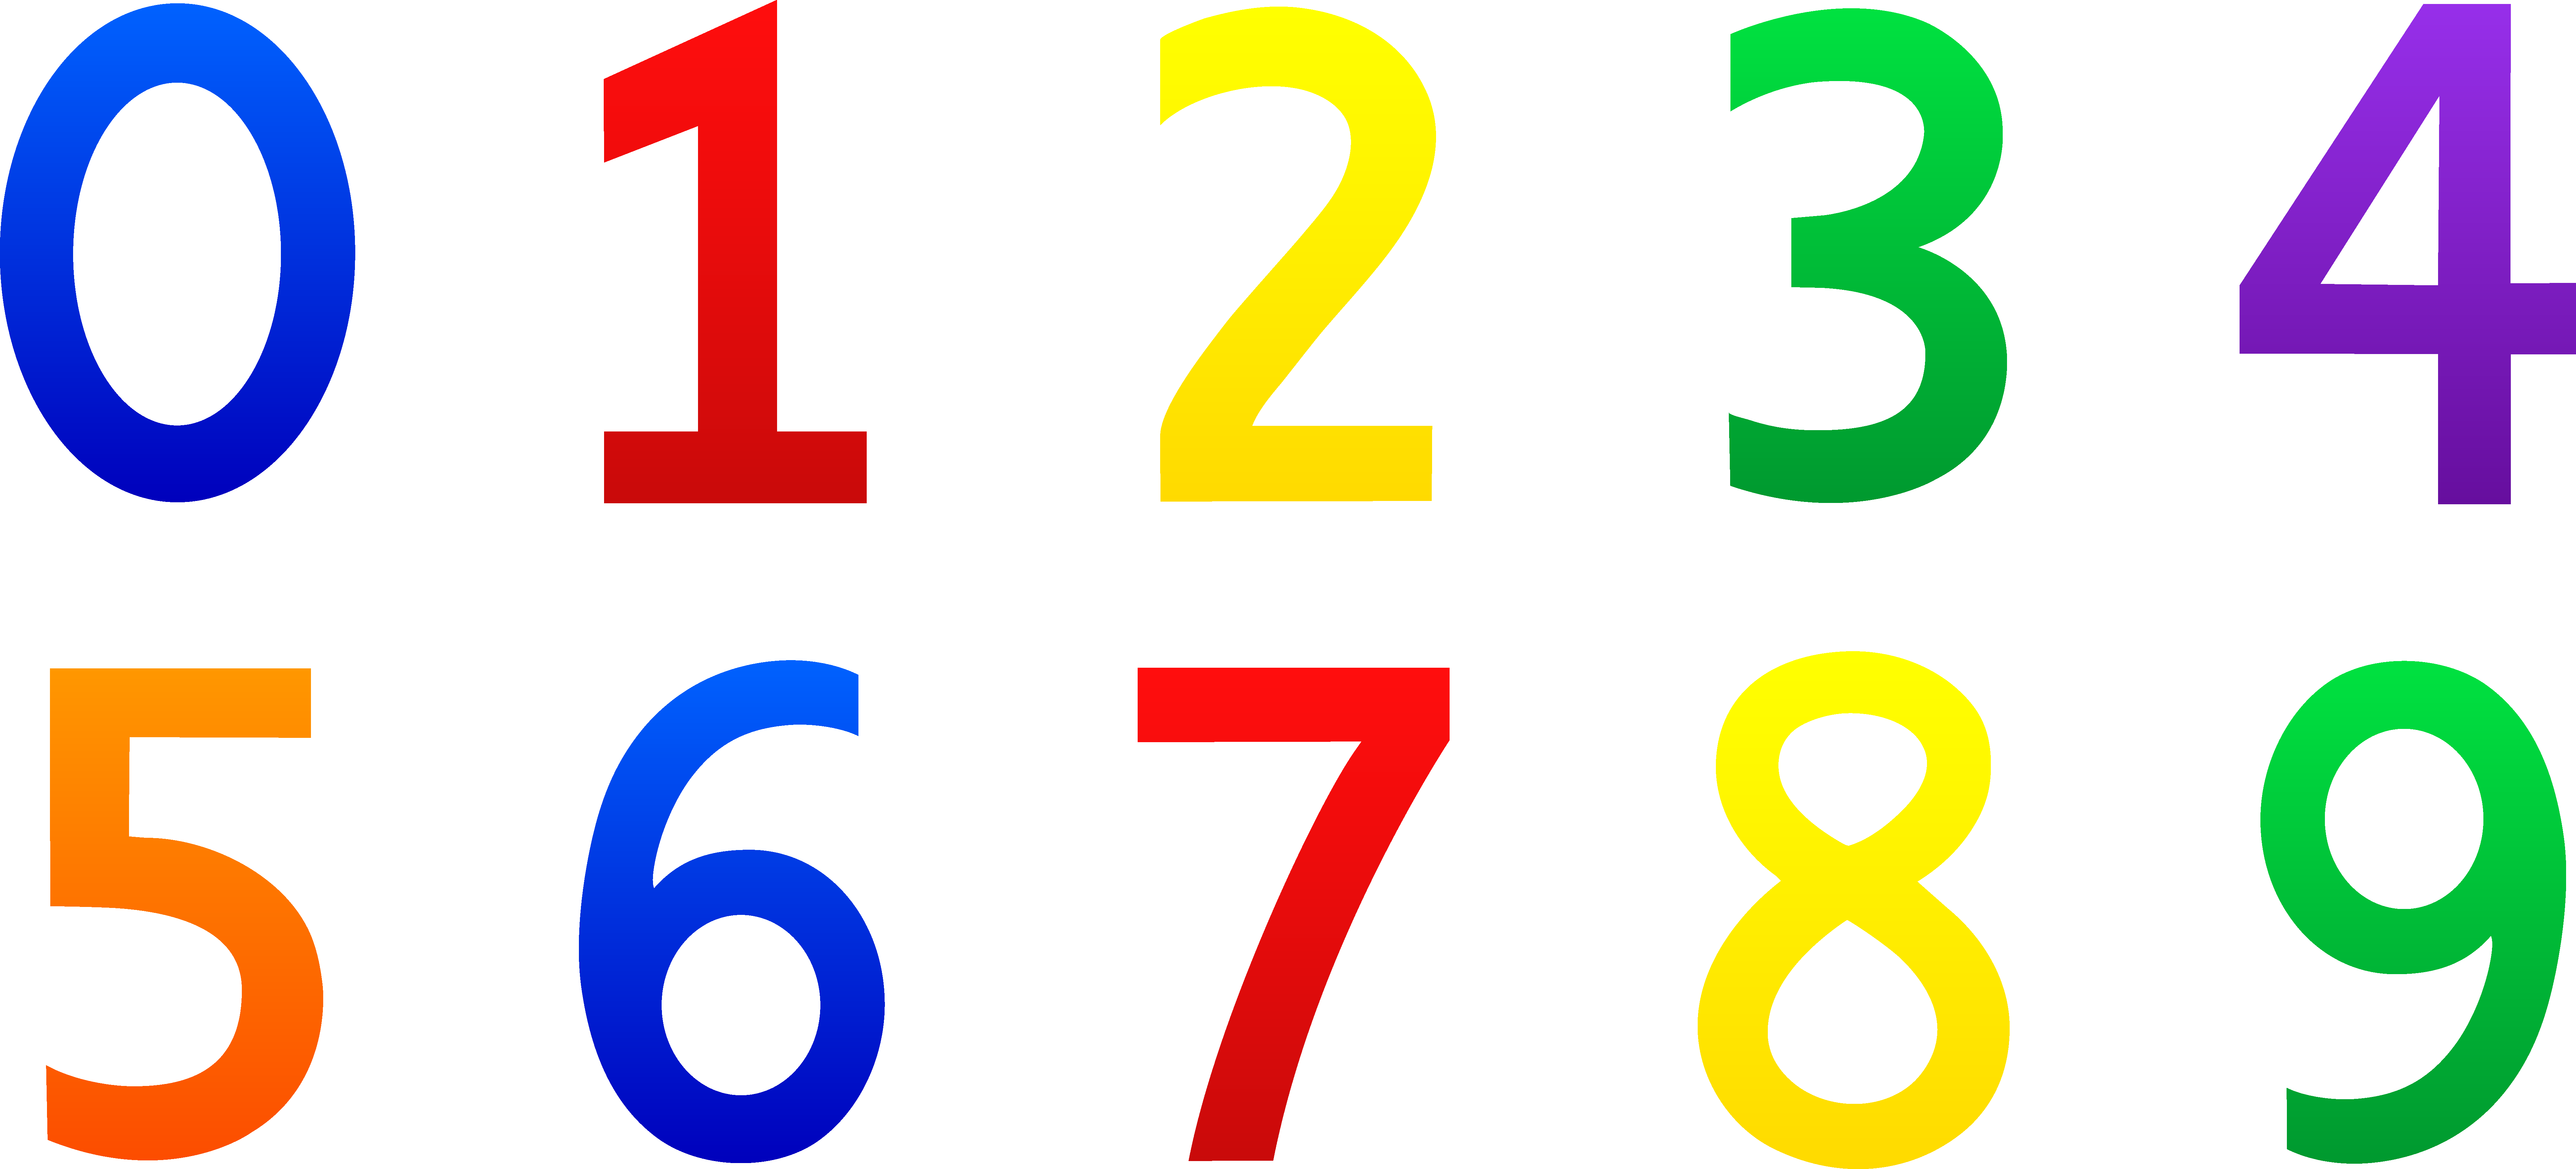 Colorful Set of Numbers 0-9 - Free Clip Art